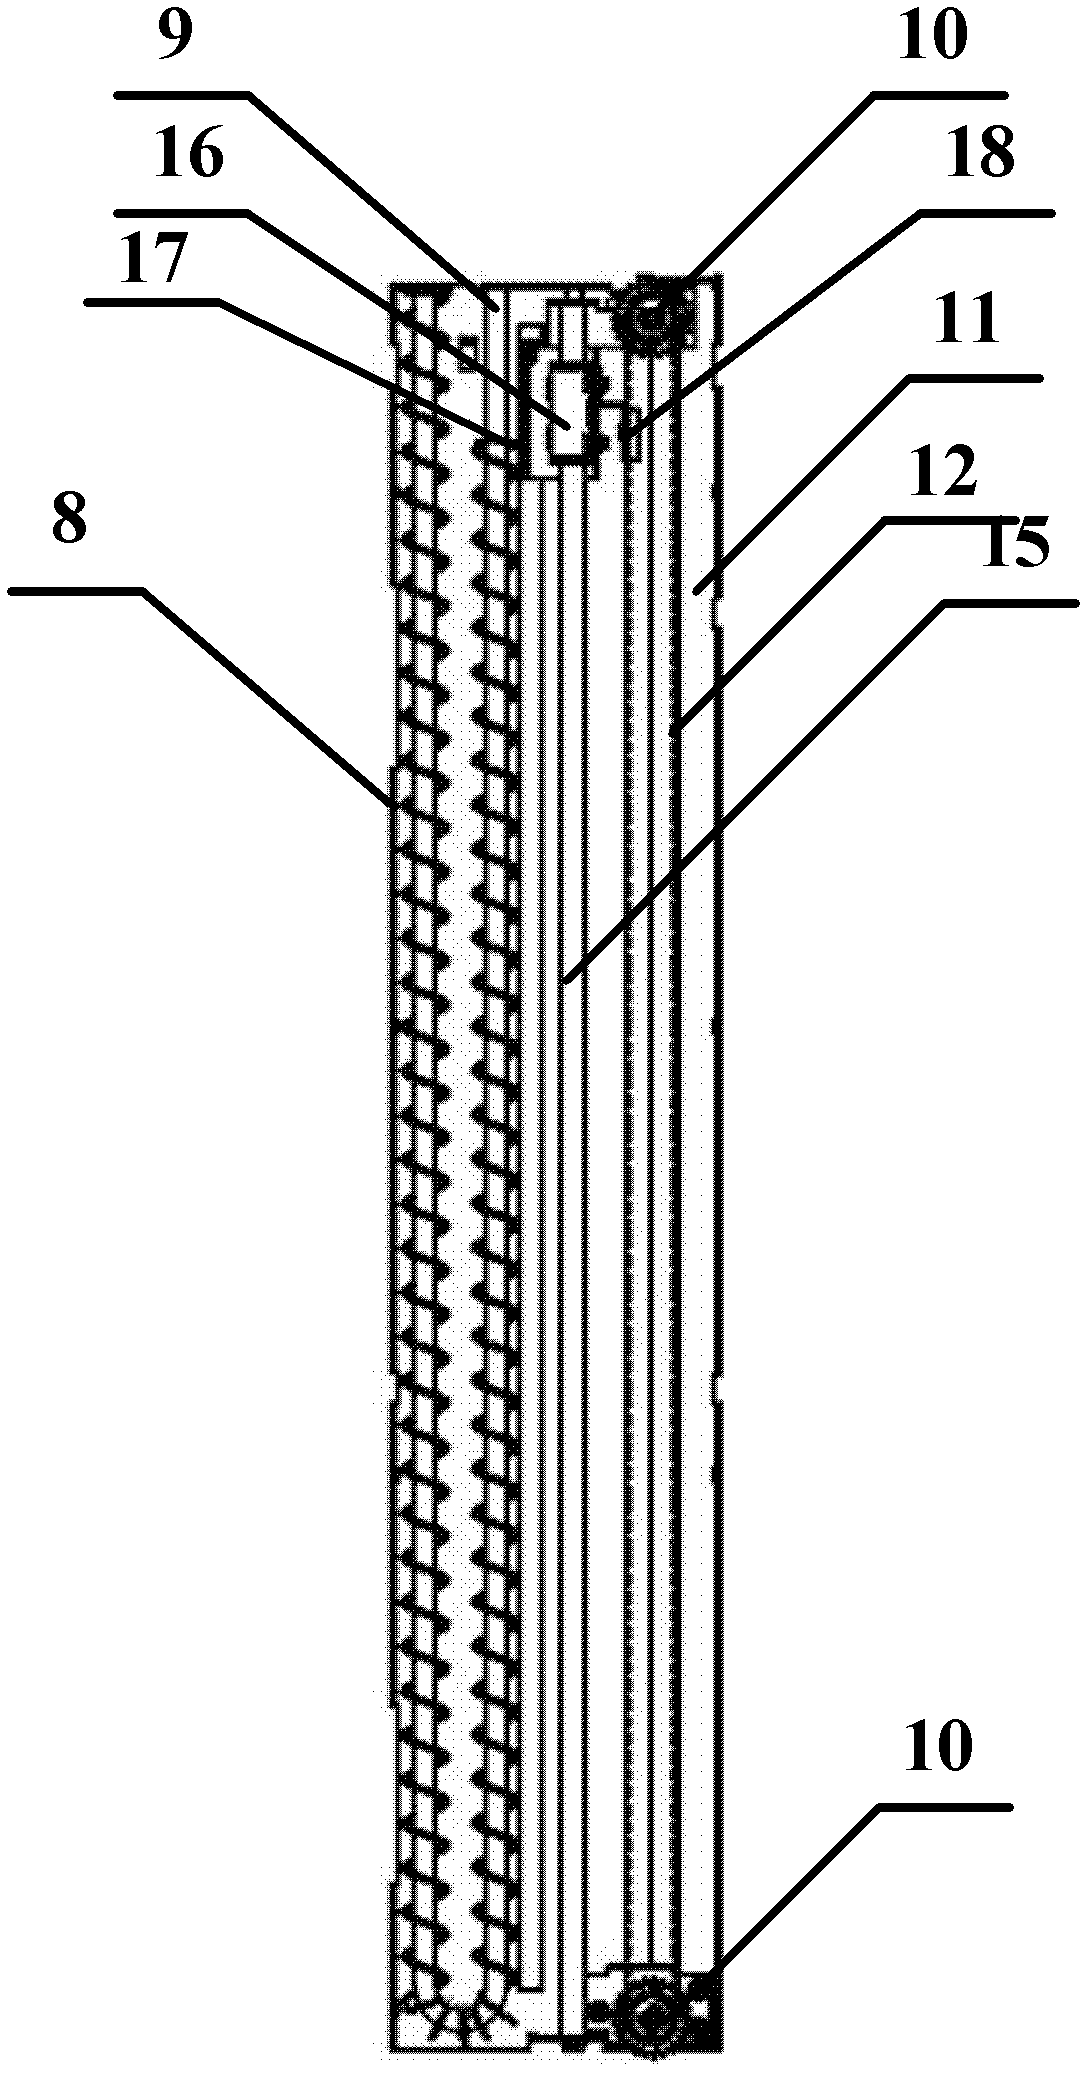 Ticket box device for storing and taking ticket cards